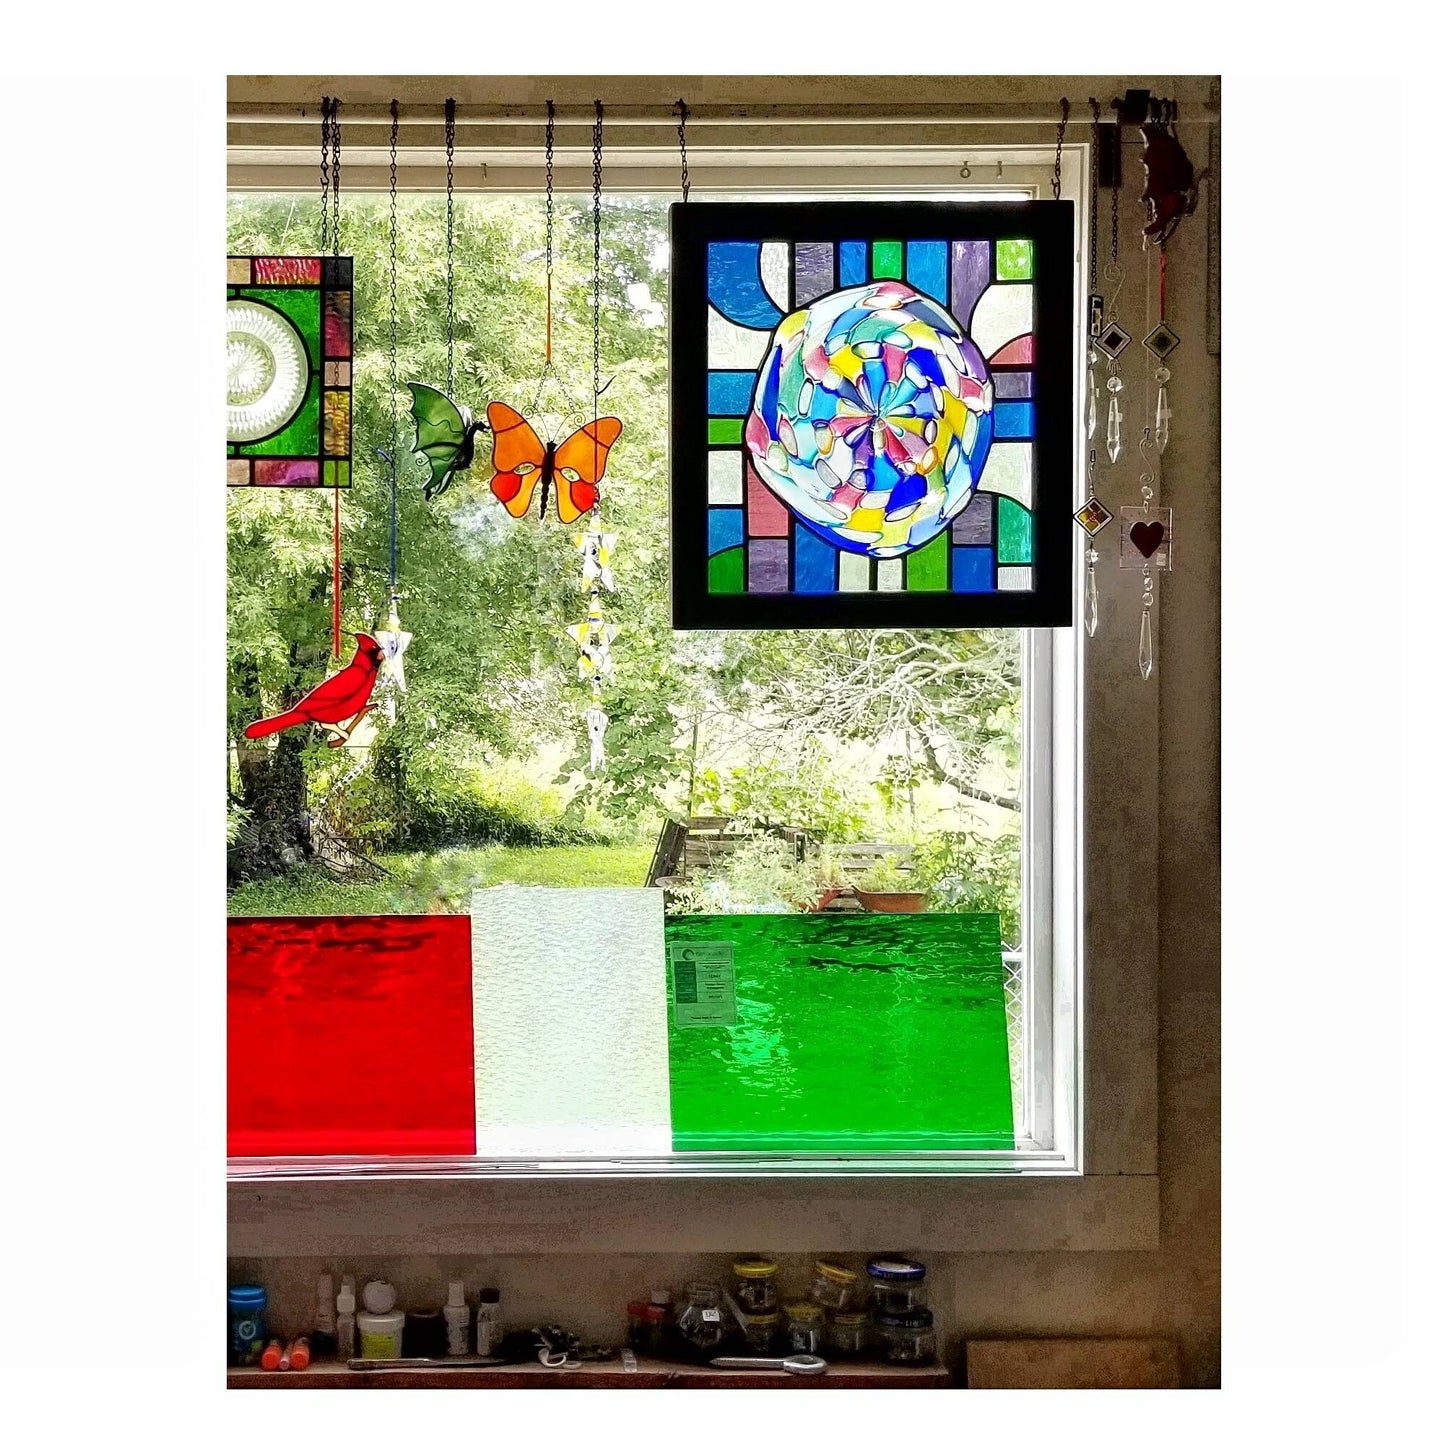 Stained Glass Sheets. Red, Green & Iridescent Clear. 4 pieces for holiday suncatchers. Diy, Artisian Glass Projects. Waterglass, Granite.